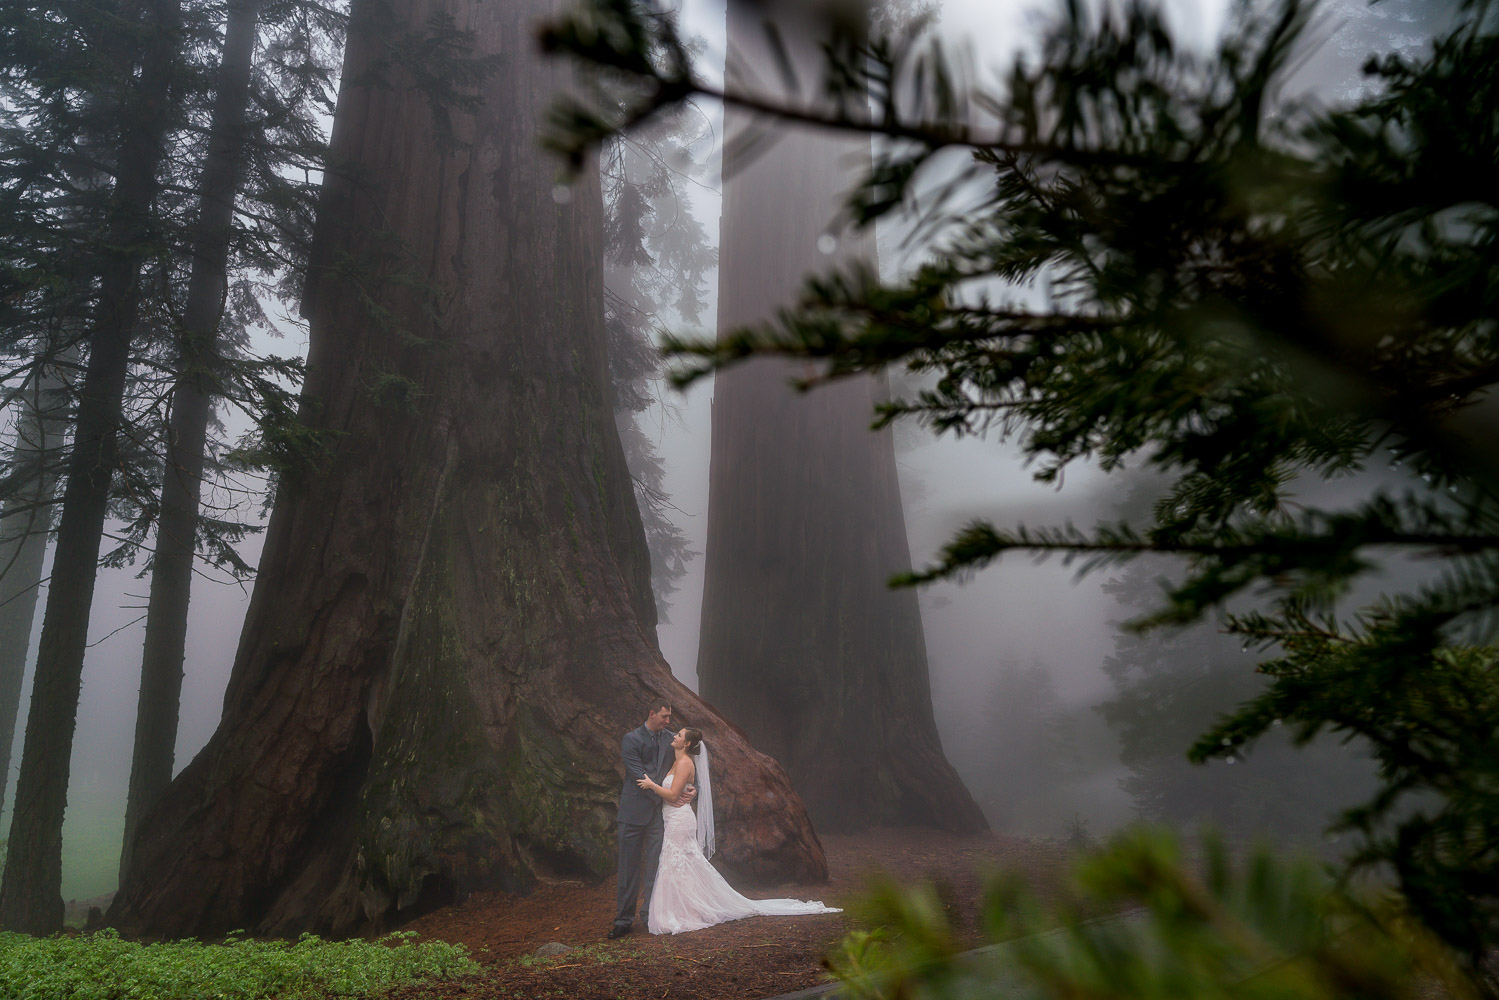 Sequoia National Park Wedding Portraits in Giant Forest